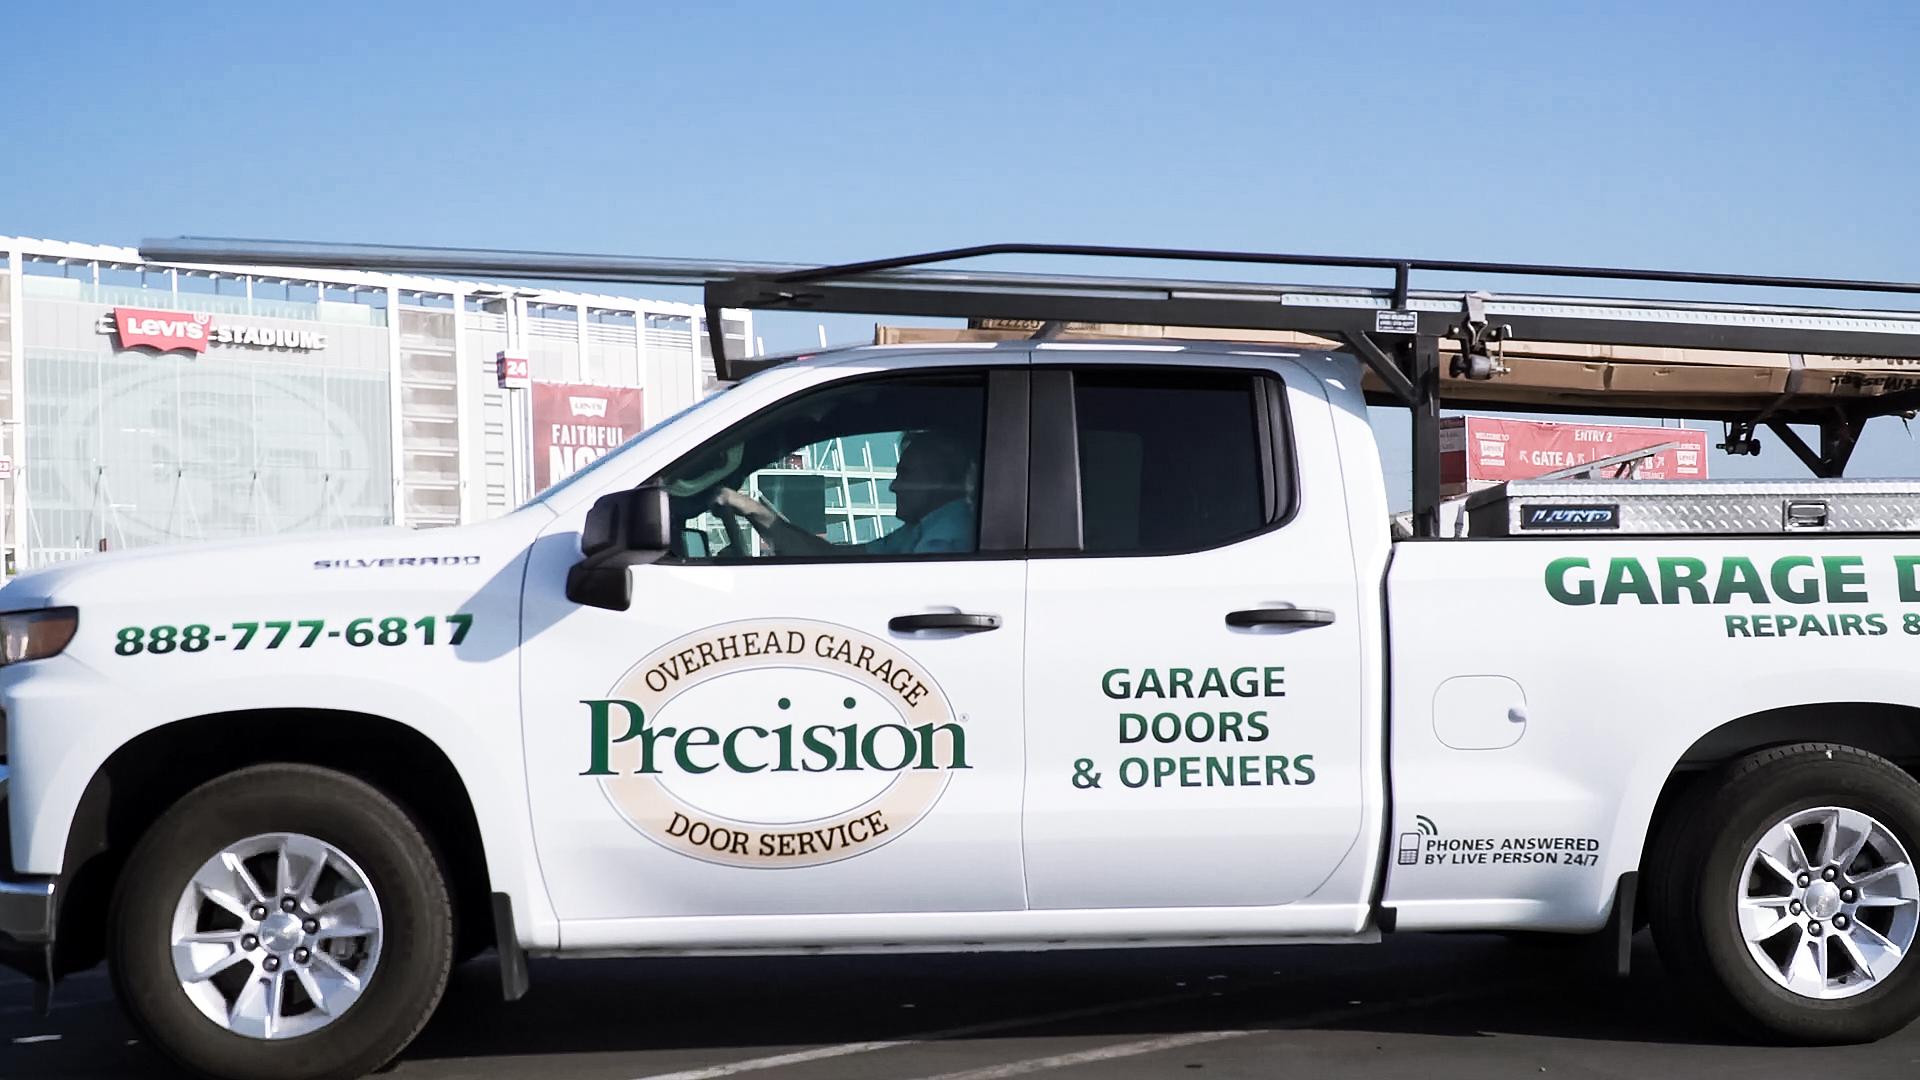 Picture of One of Precision Door Services of the Bay Area's service trucks - Precision Door Services of the Bay Area